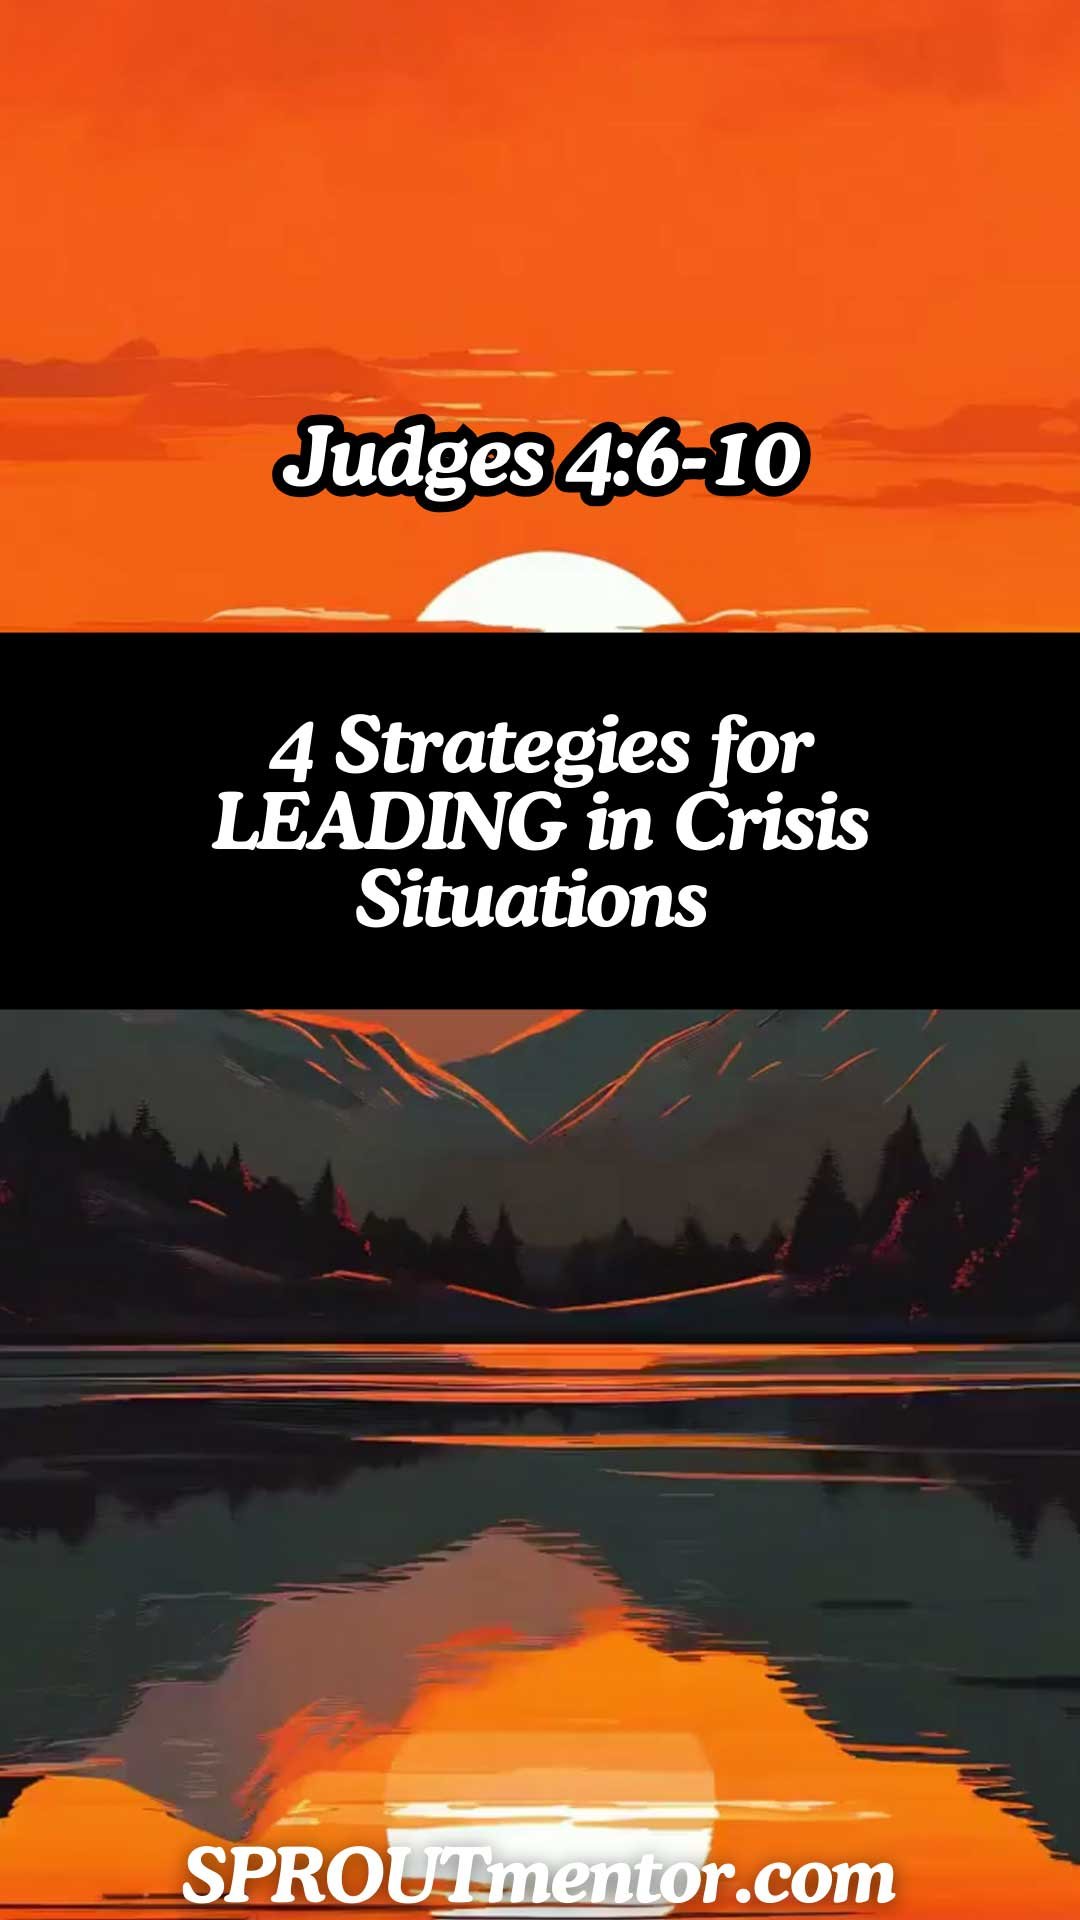 4 Strategies for LEADING in Crisis Situations [Judges 4:6-10]